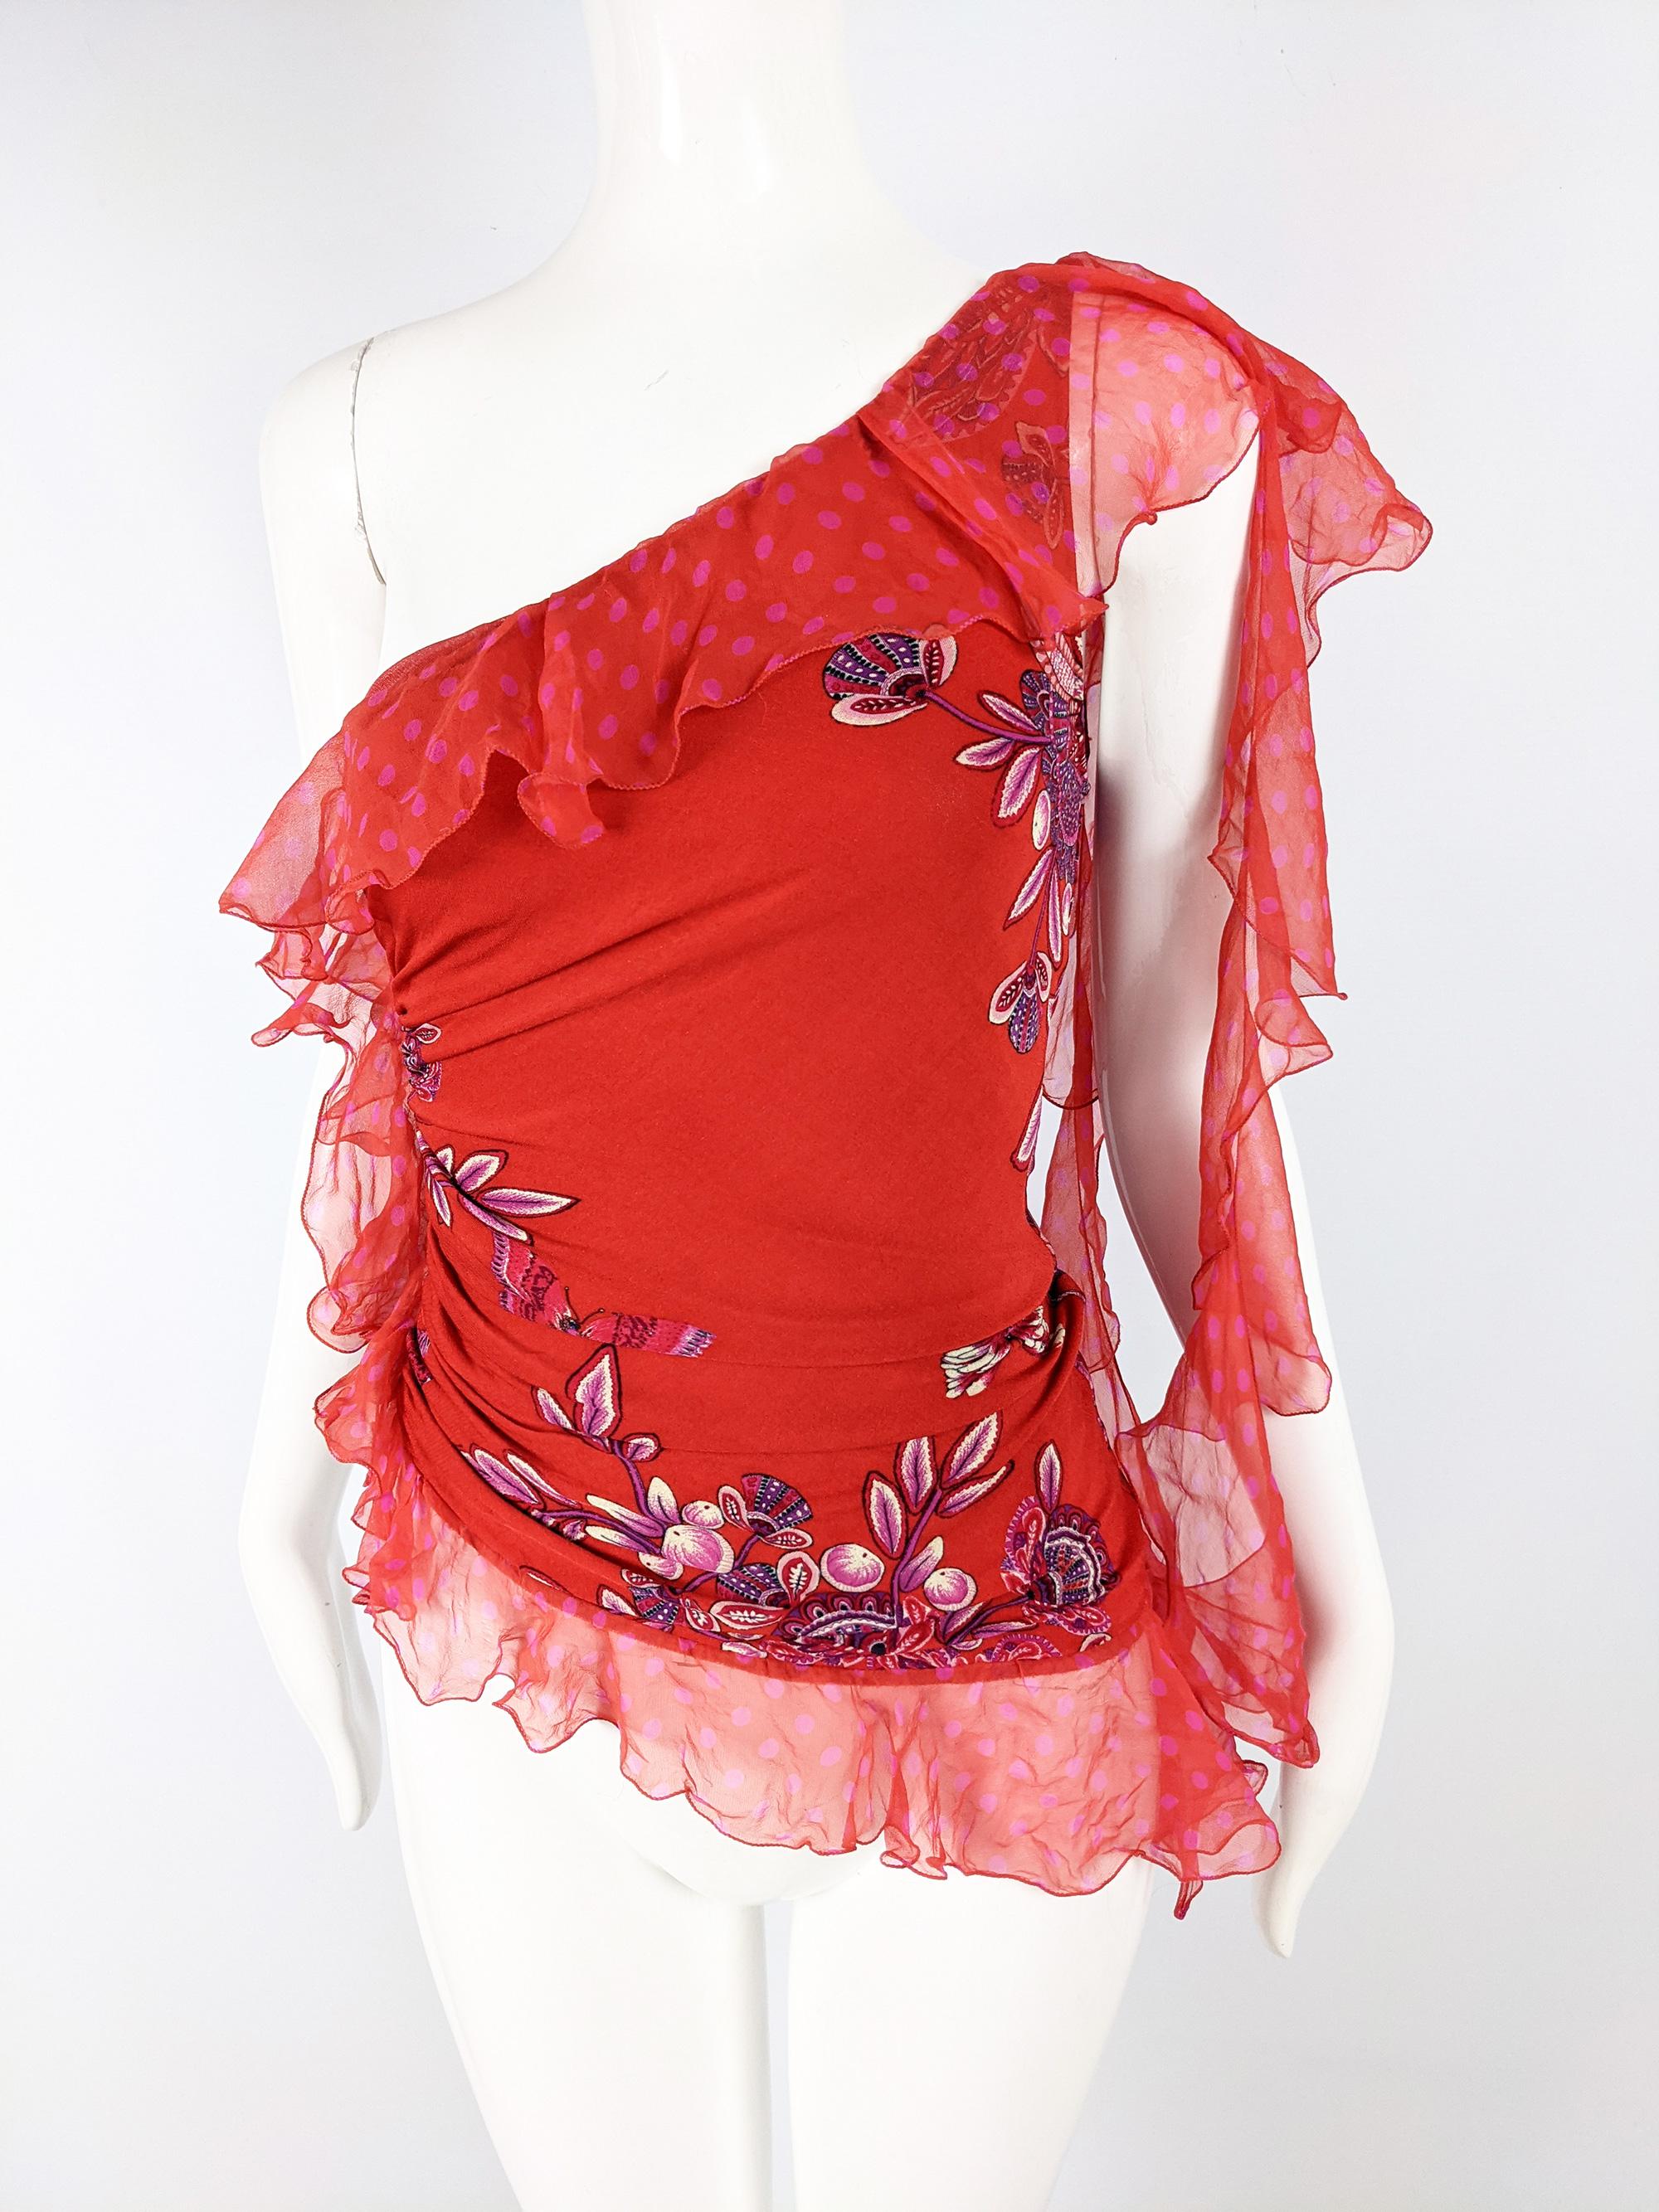 Women's Emanuel Ungaro Vintage Red Ruched & Ruffled Silk Party Top, 2000s